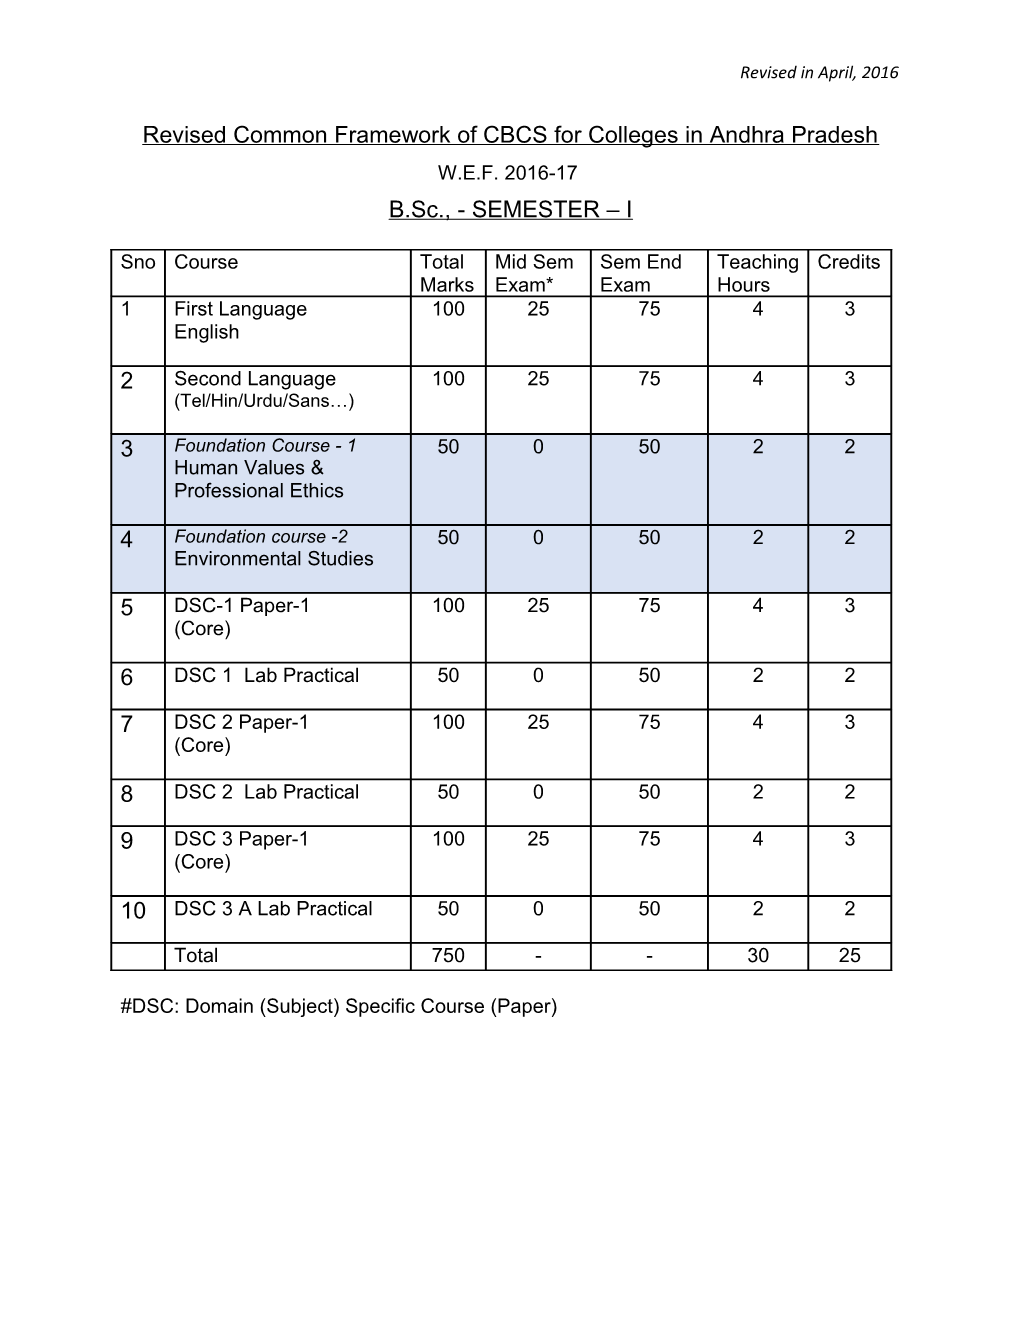 Revised Common Framework of CBCS for Colleges in Andhra Pradesh